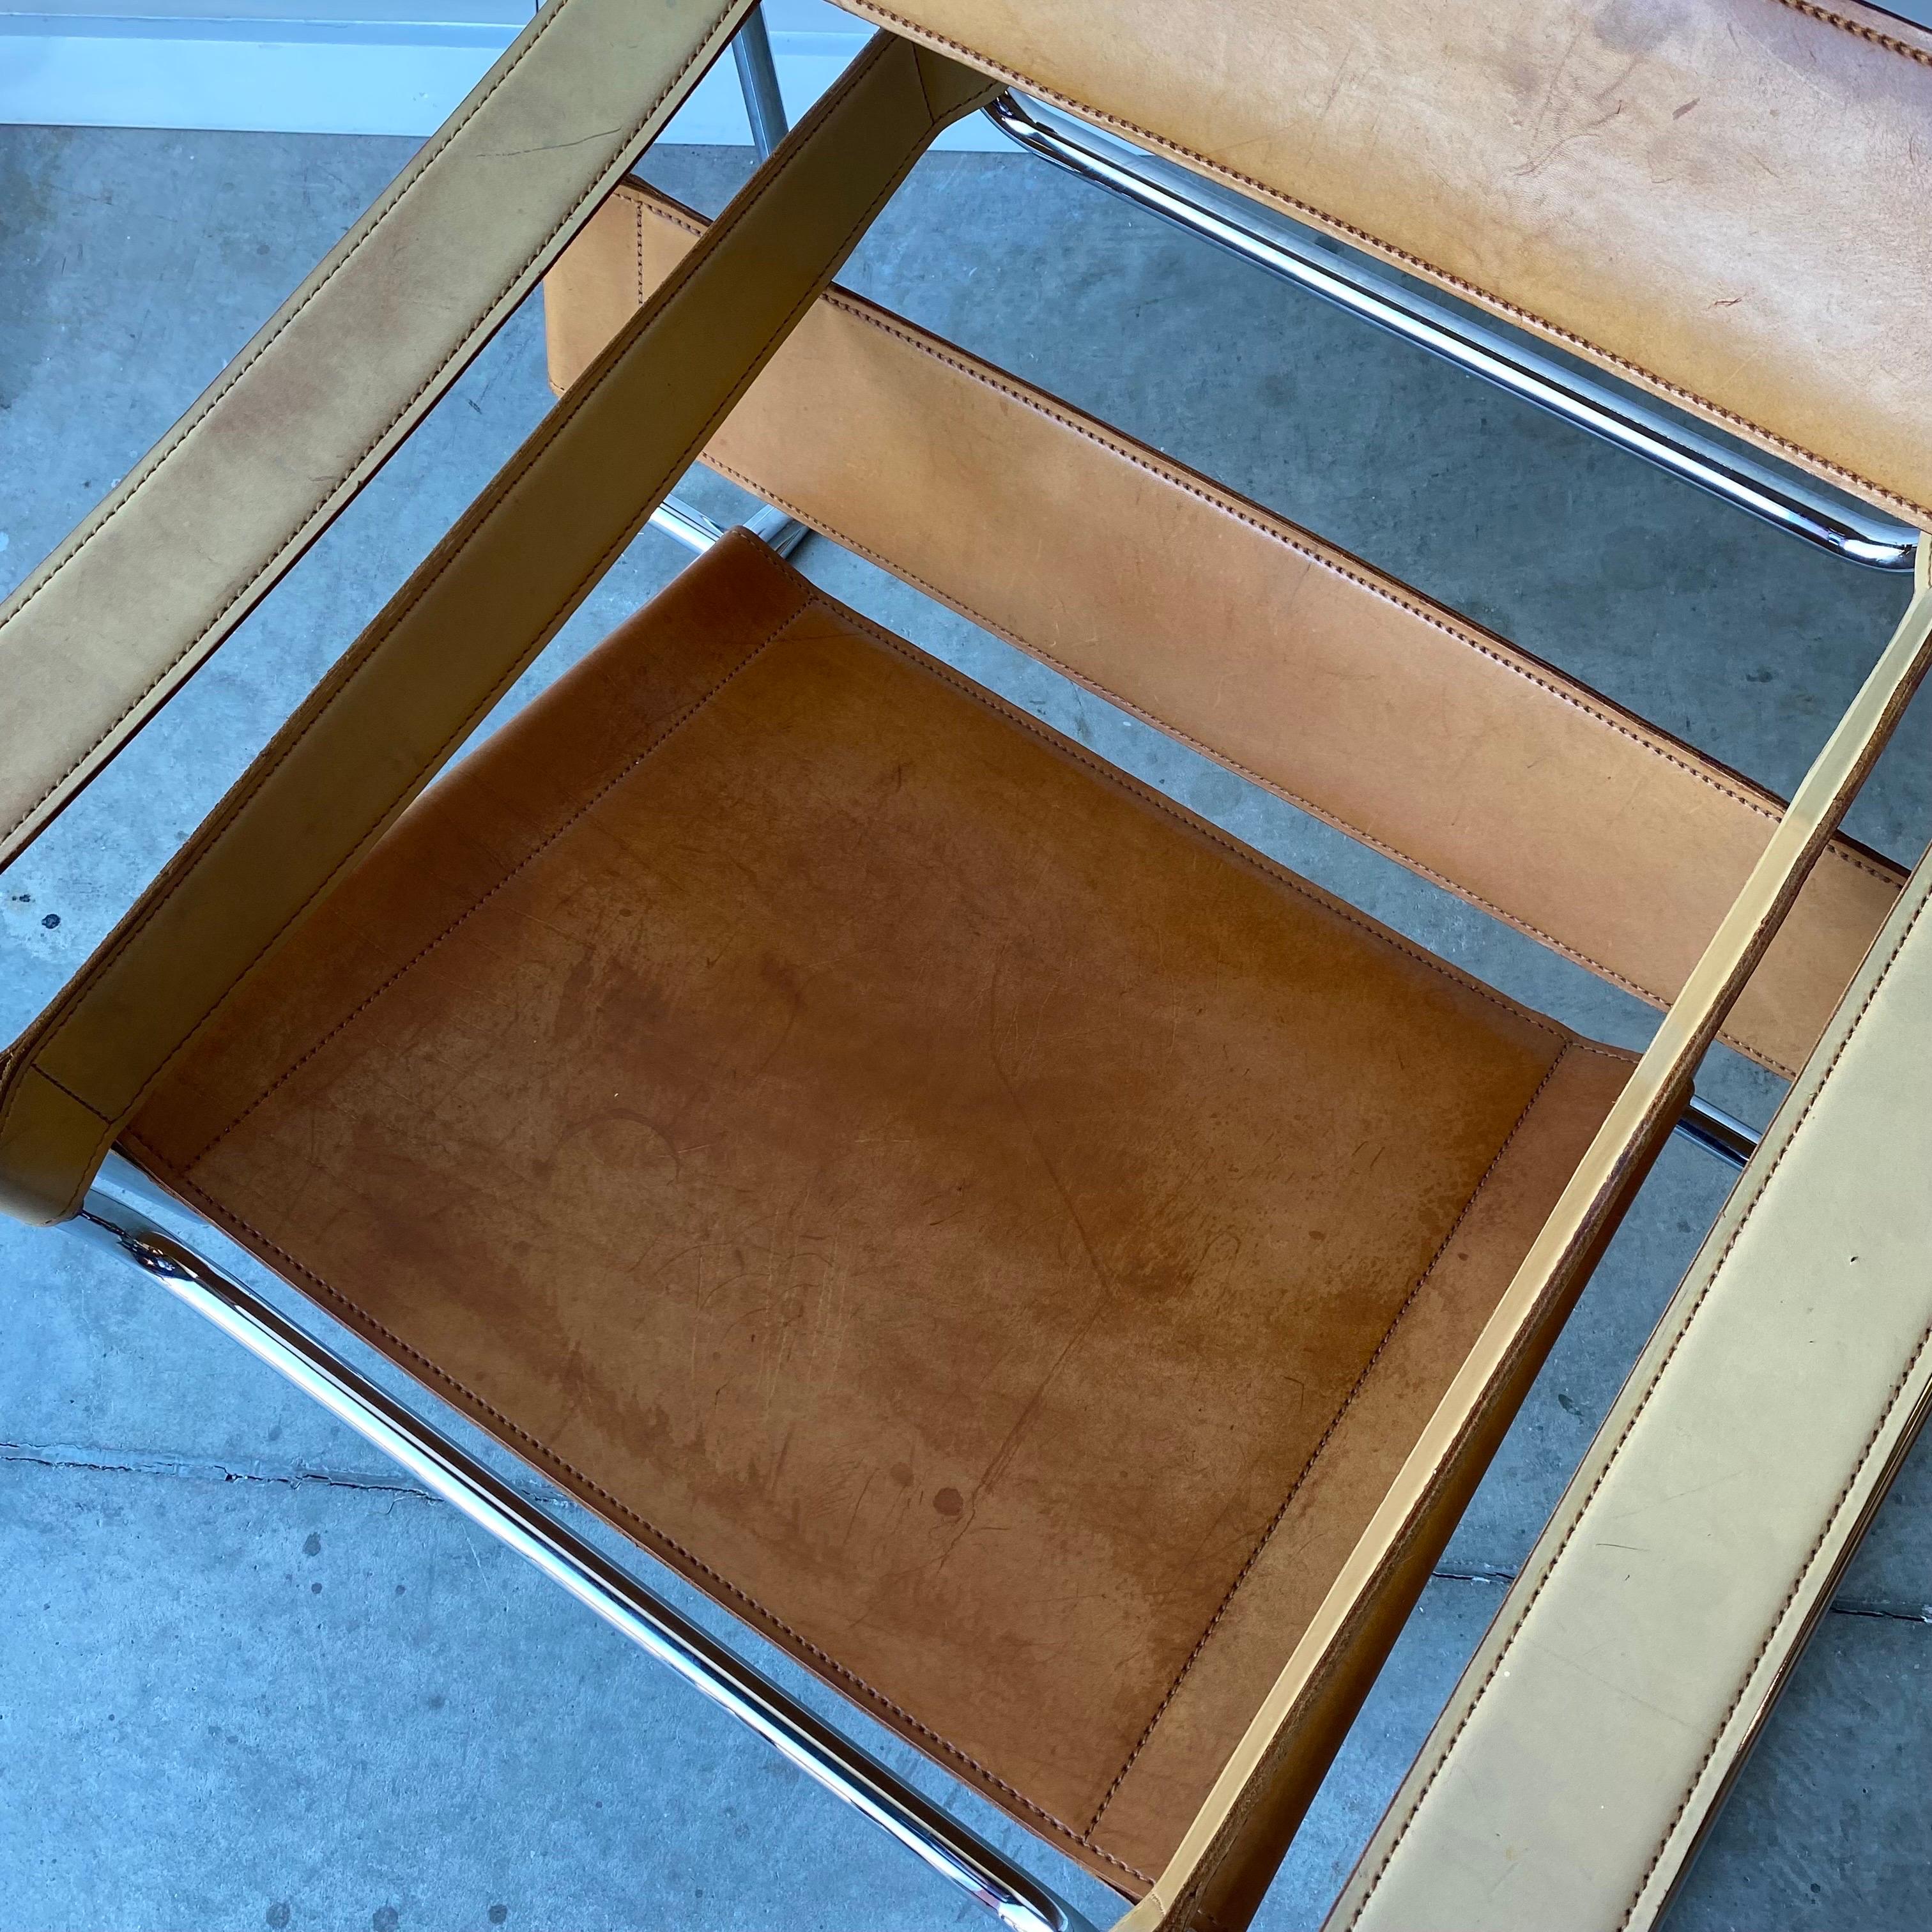 Steel Marcel Breuer Wassily Chairs, a Pair